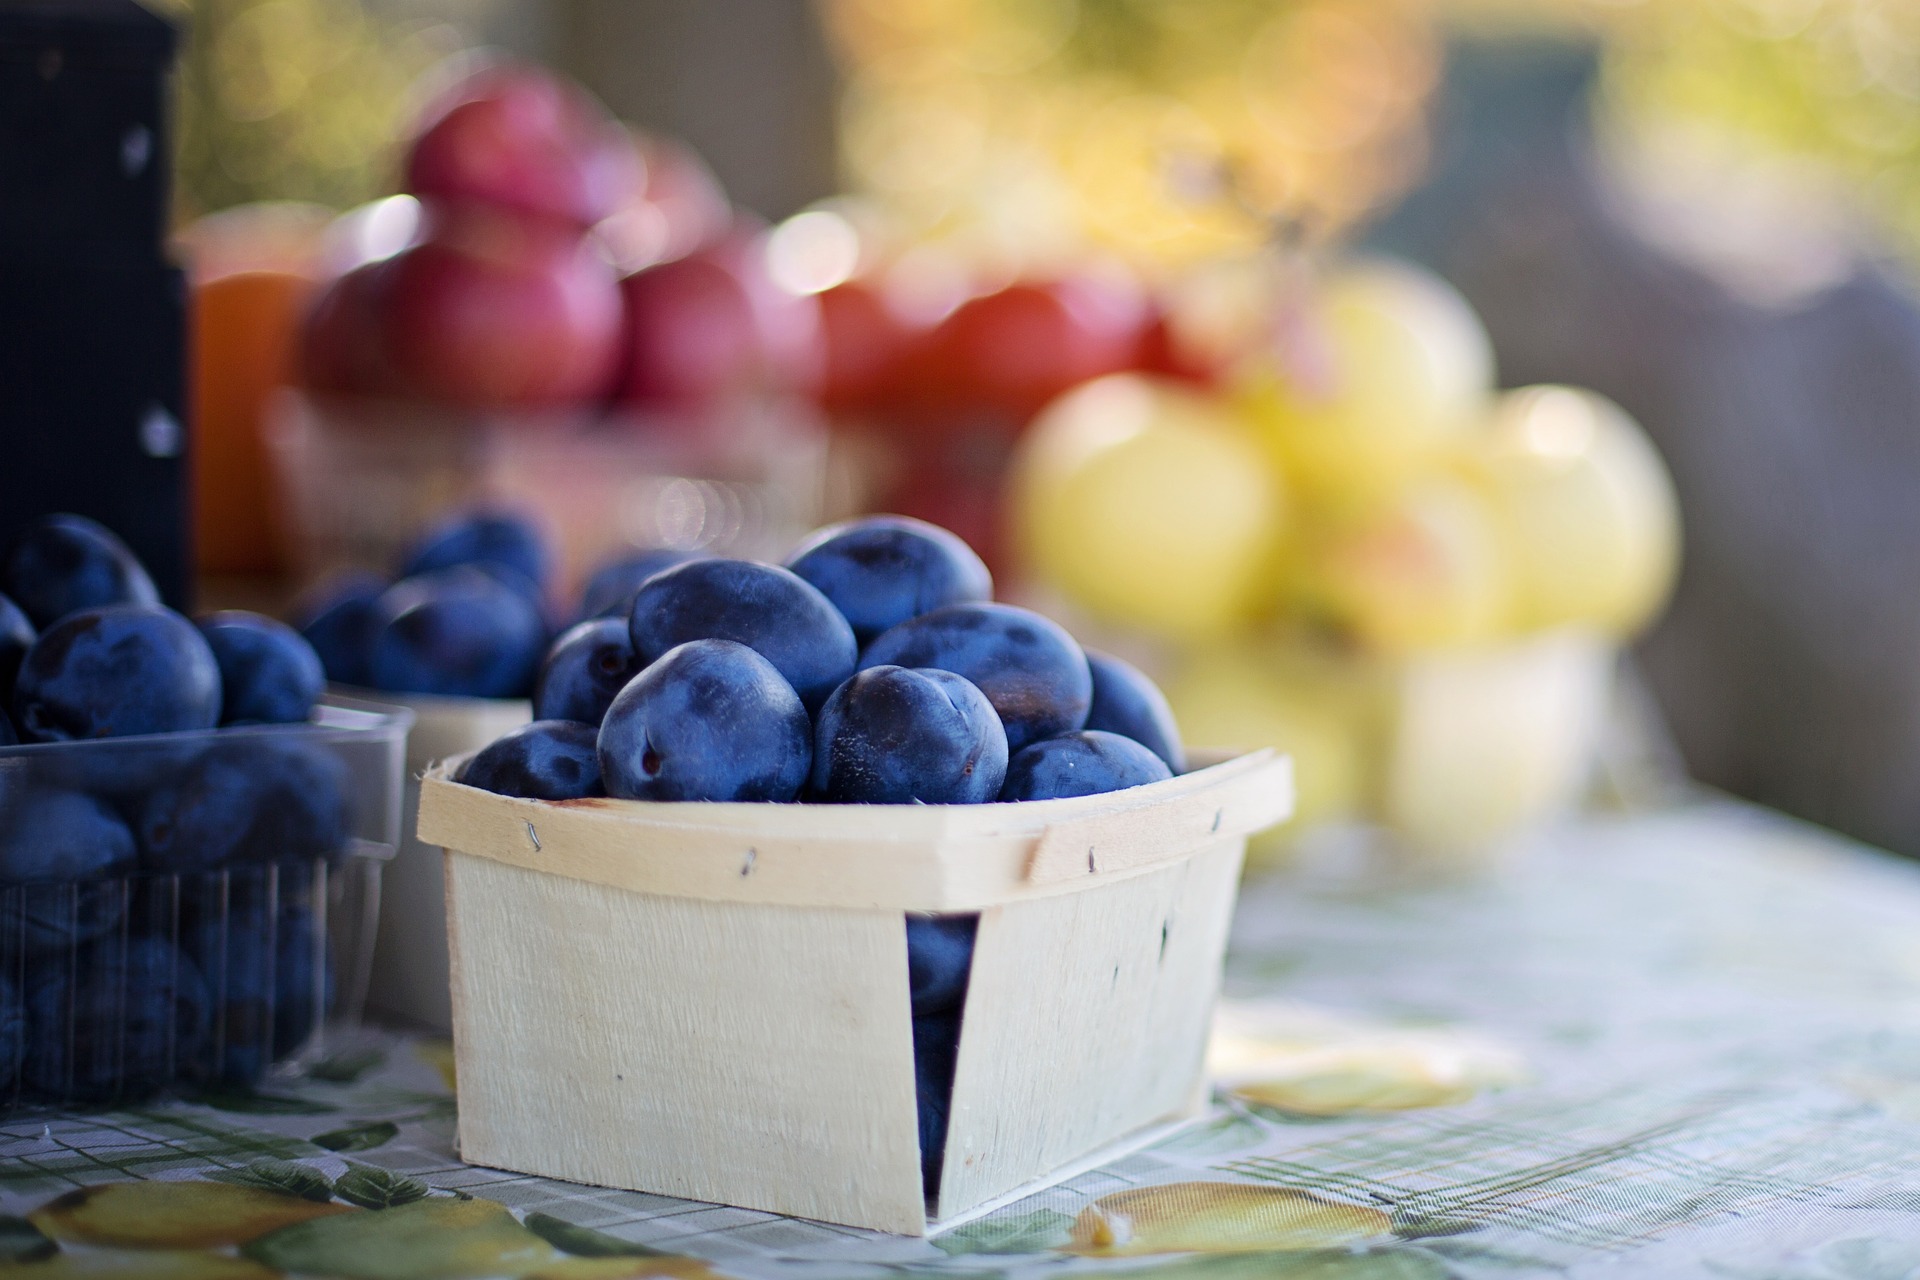 Fruit on the table - blueberries and grape photo